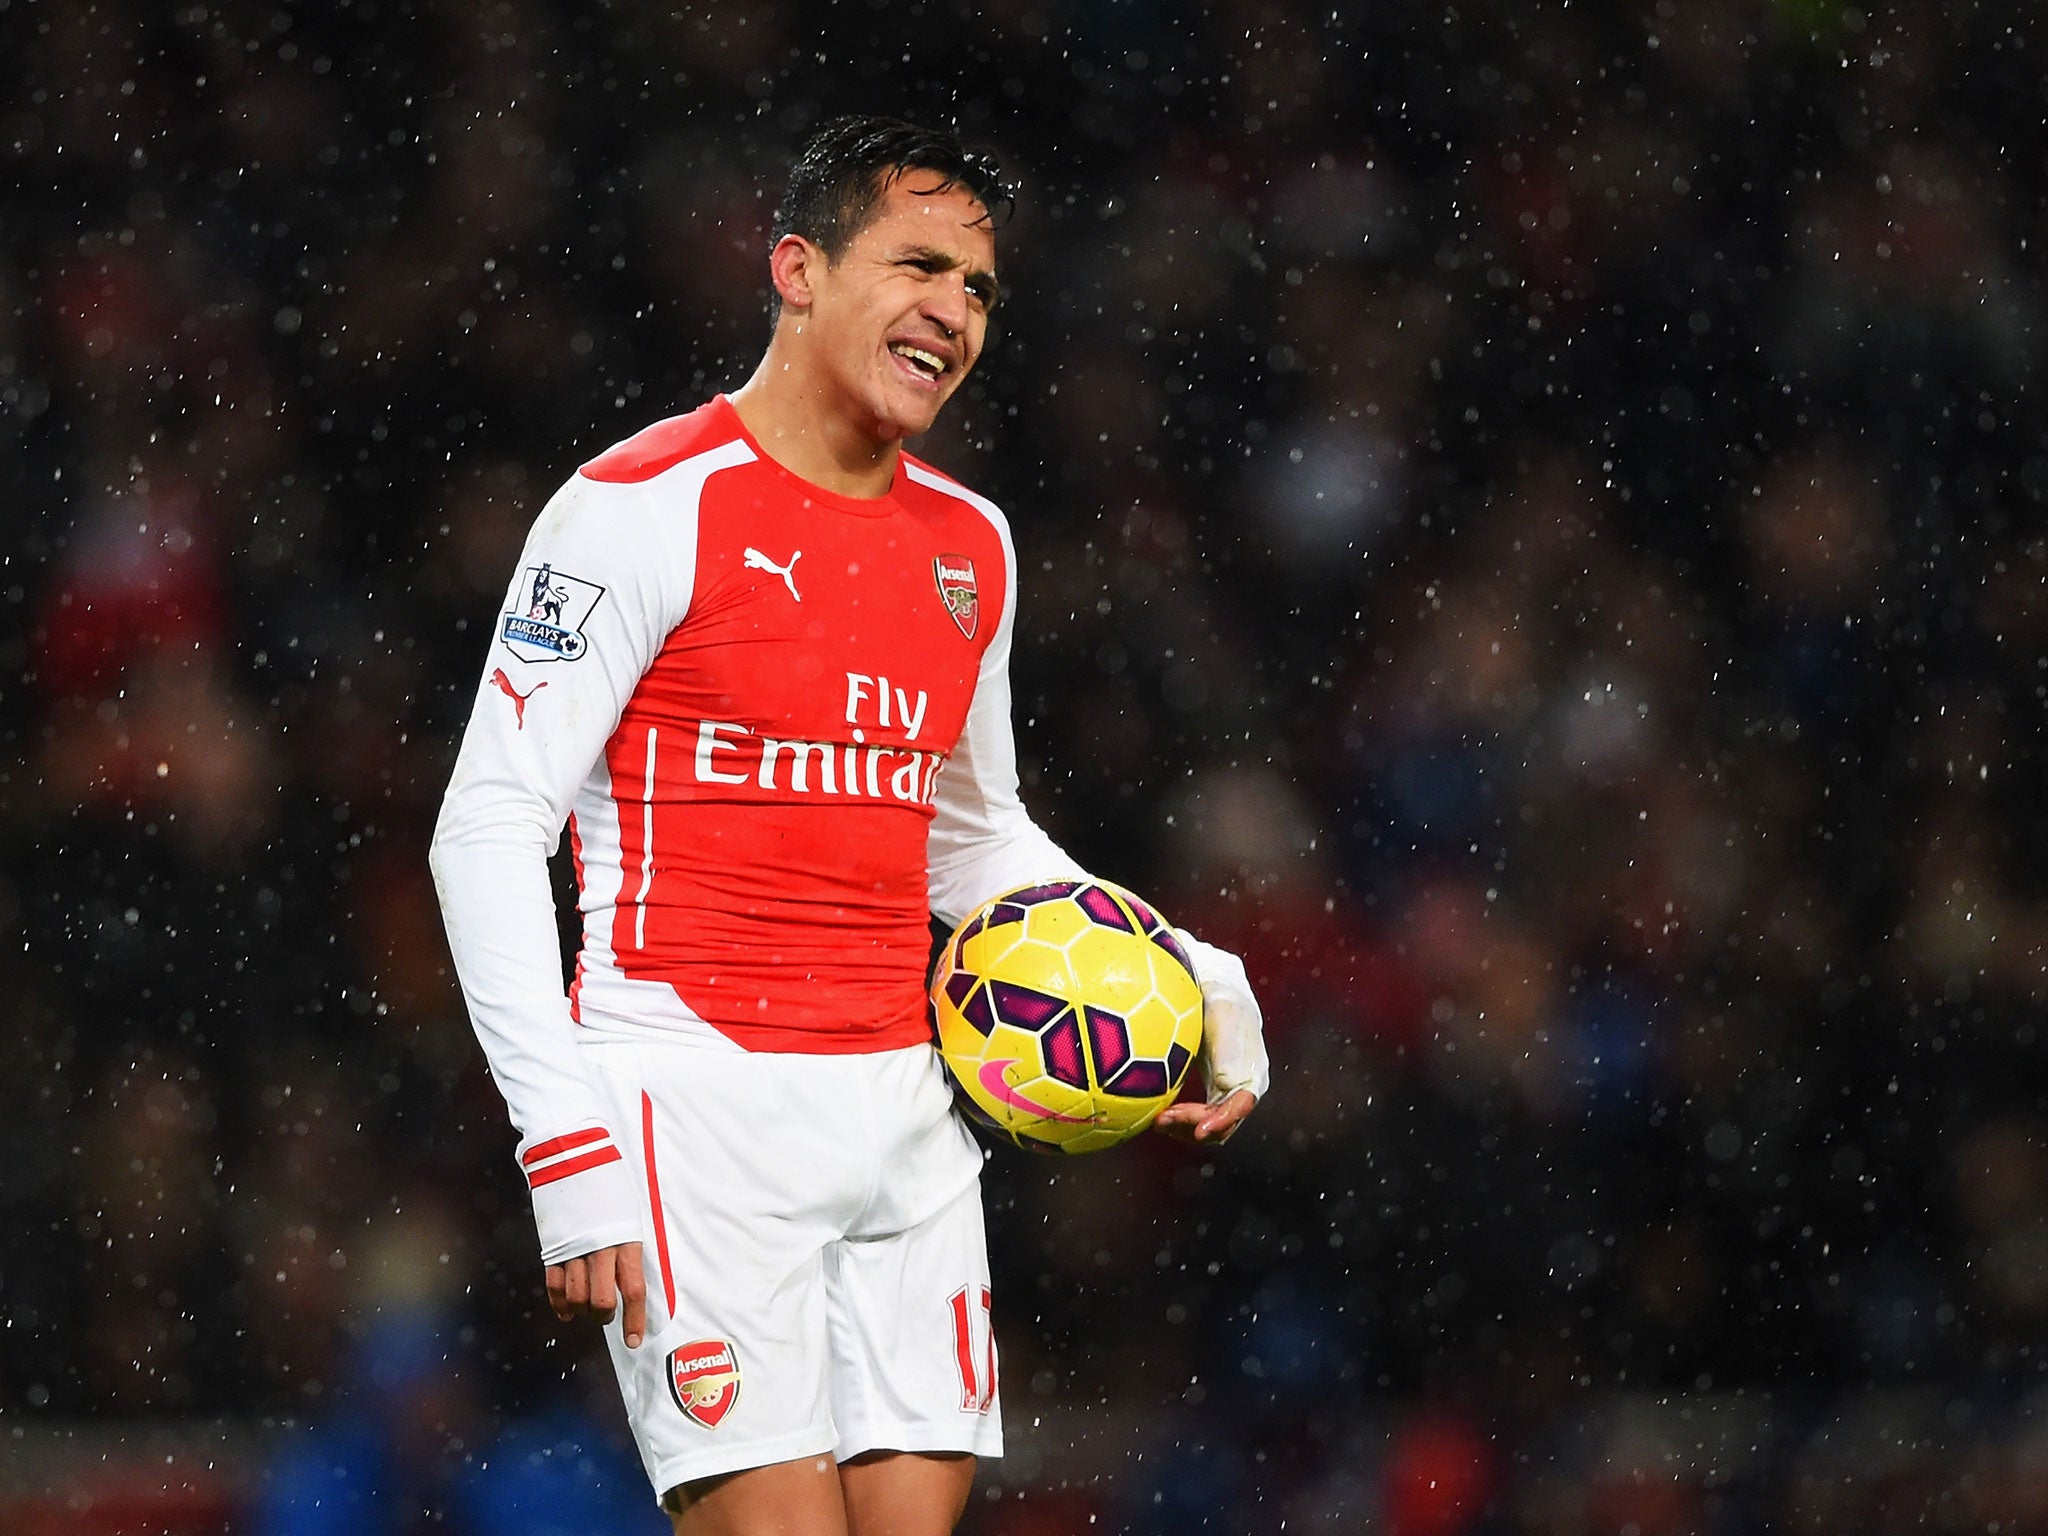 Alexis Sanchez missed a penalty before scoring the opening goal with a header at the back post